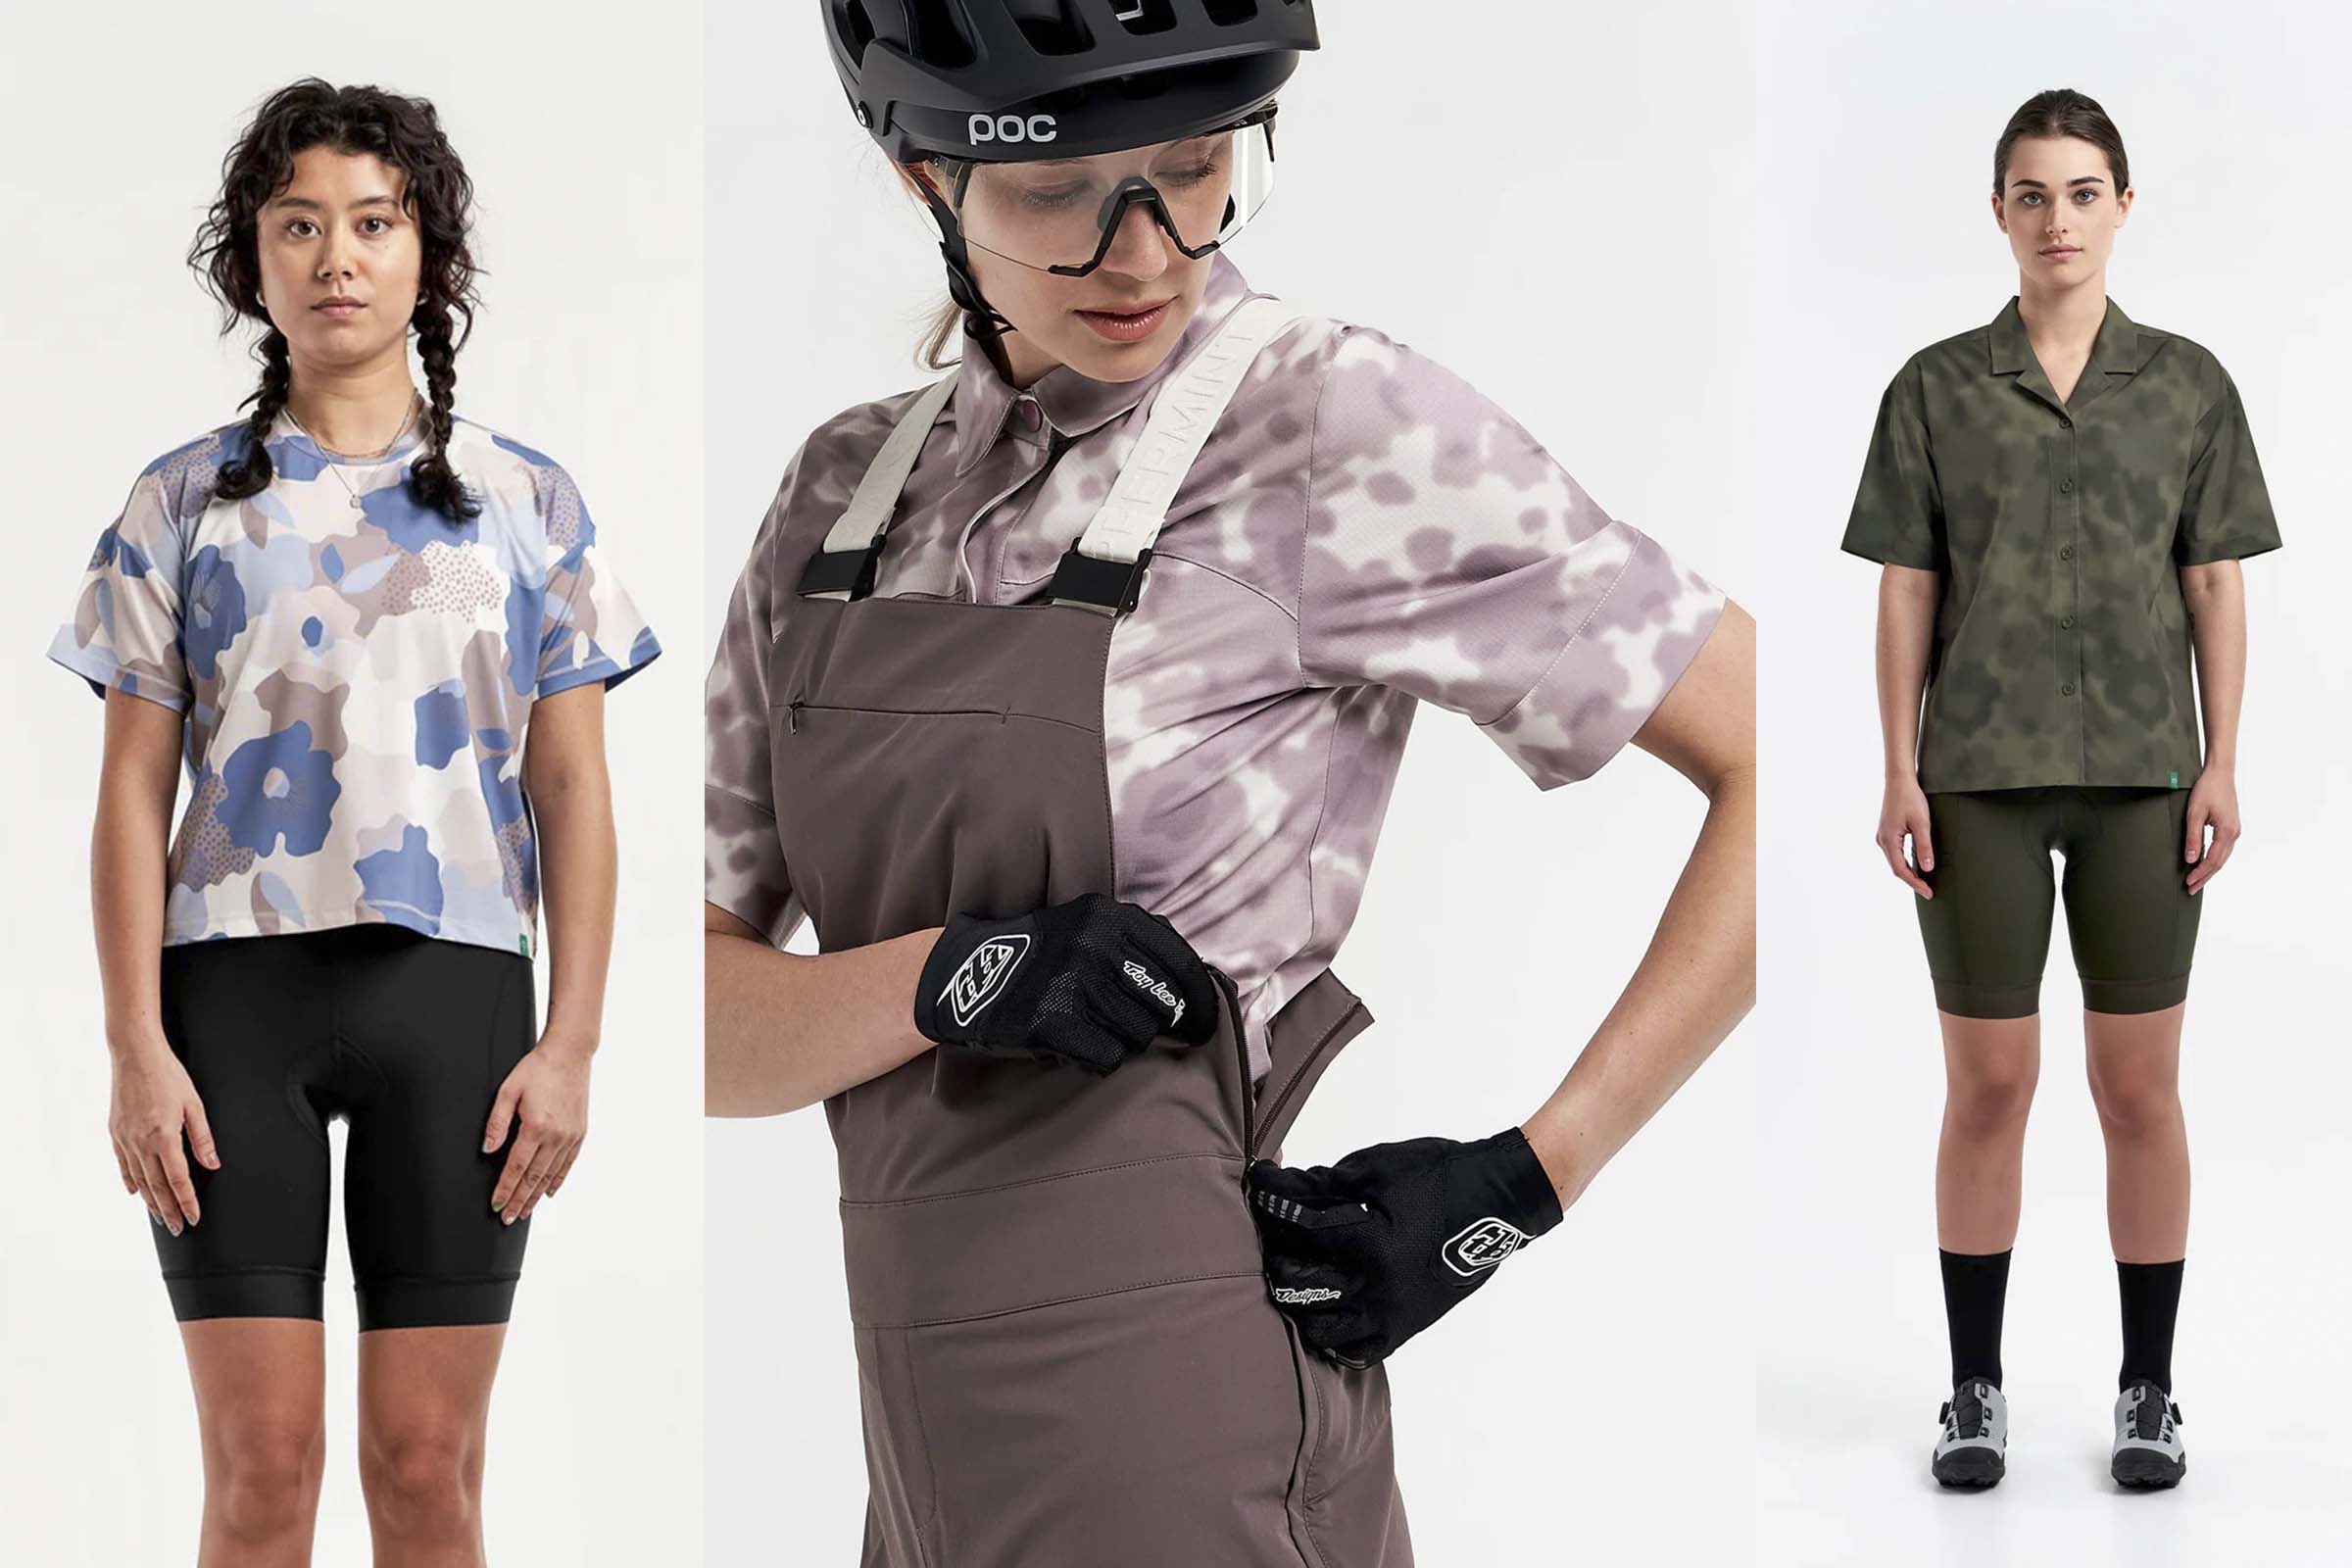 5 New Women's Off-road Cycling Apparel Lineups 